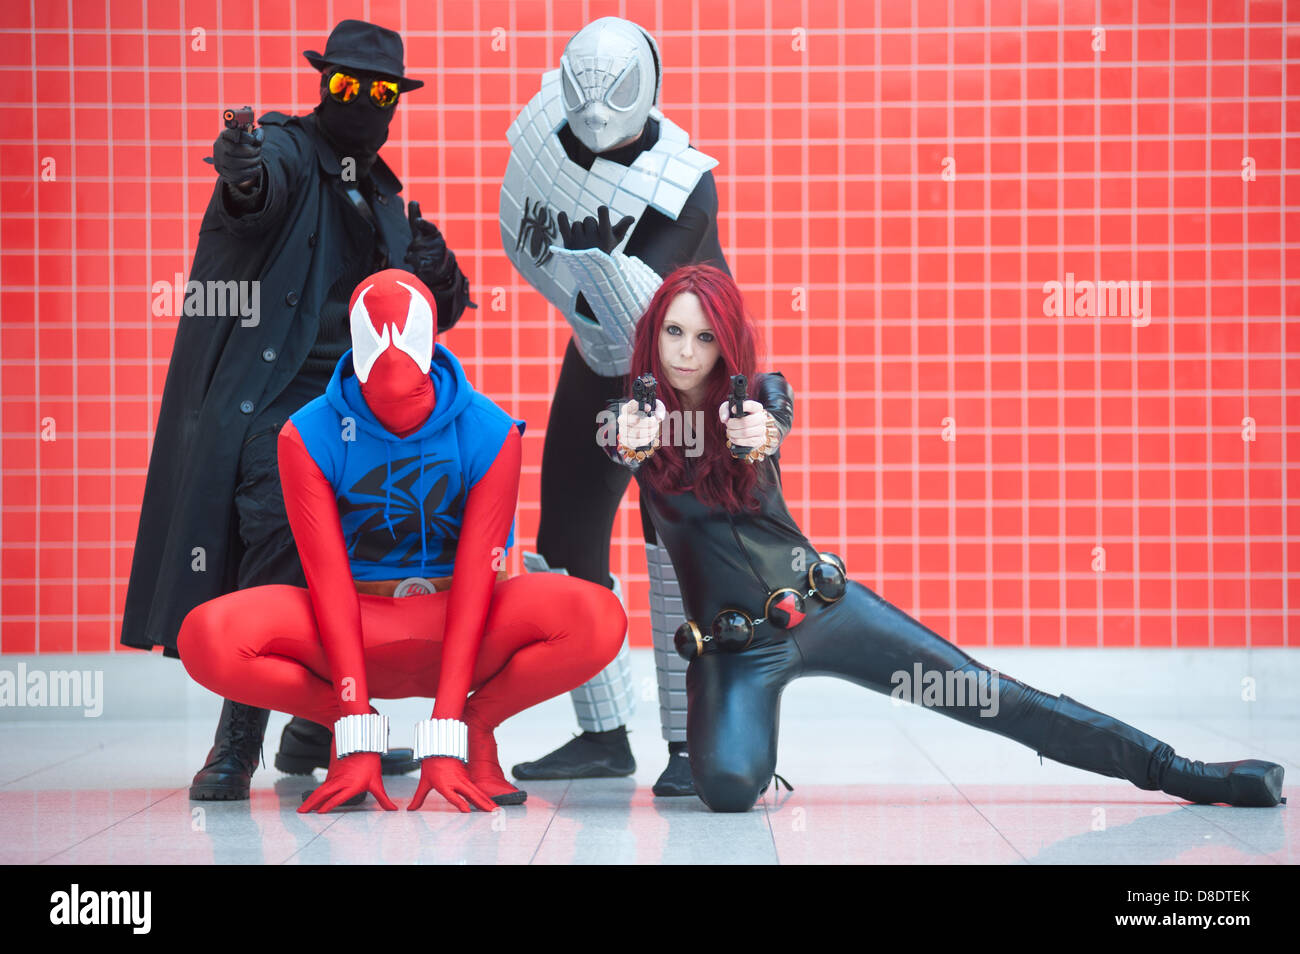 London, UK - 26 May 2013: dorian Hawkins as Spiderman Noir, Chris Brown as Scarlett Spiderman, Garith Hawkins as Armed Spiderman and Rocy Kinnin as Black Widow pose for a picture during the London Comic Con 2013 at Excel London. London Comic Con is the UK's largest event dedicated to pop culture attracting thousands of artists, celebrities and fans of comic books, animes and movie memorabilia. Credit: Piero Cruciatti/Alamy Live News Stock Photo